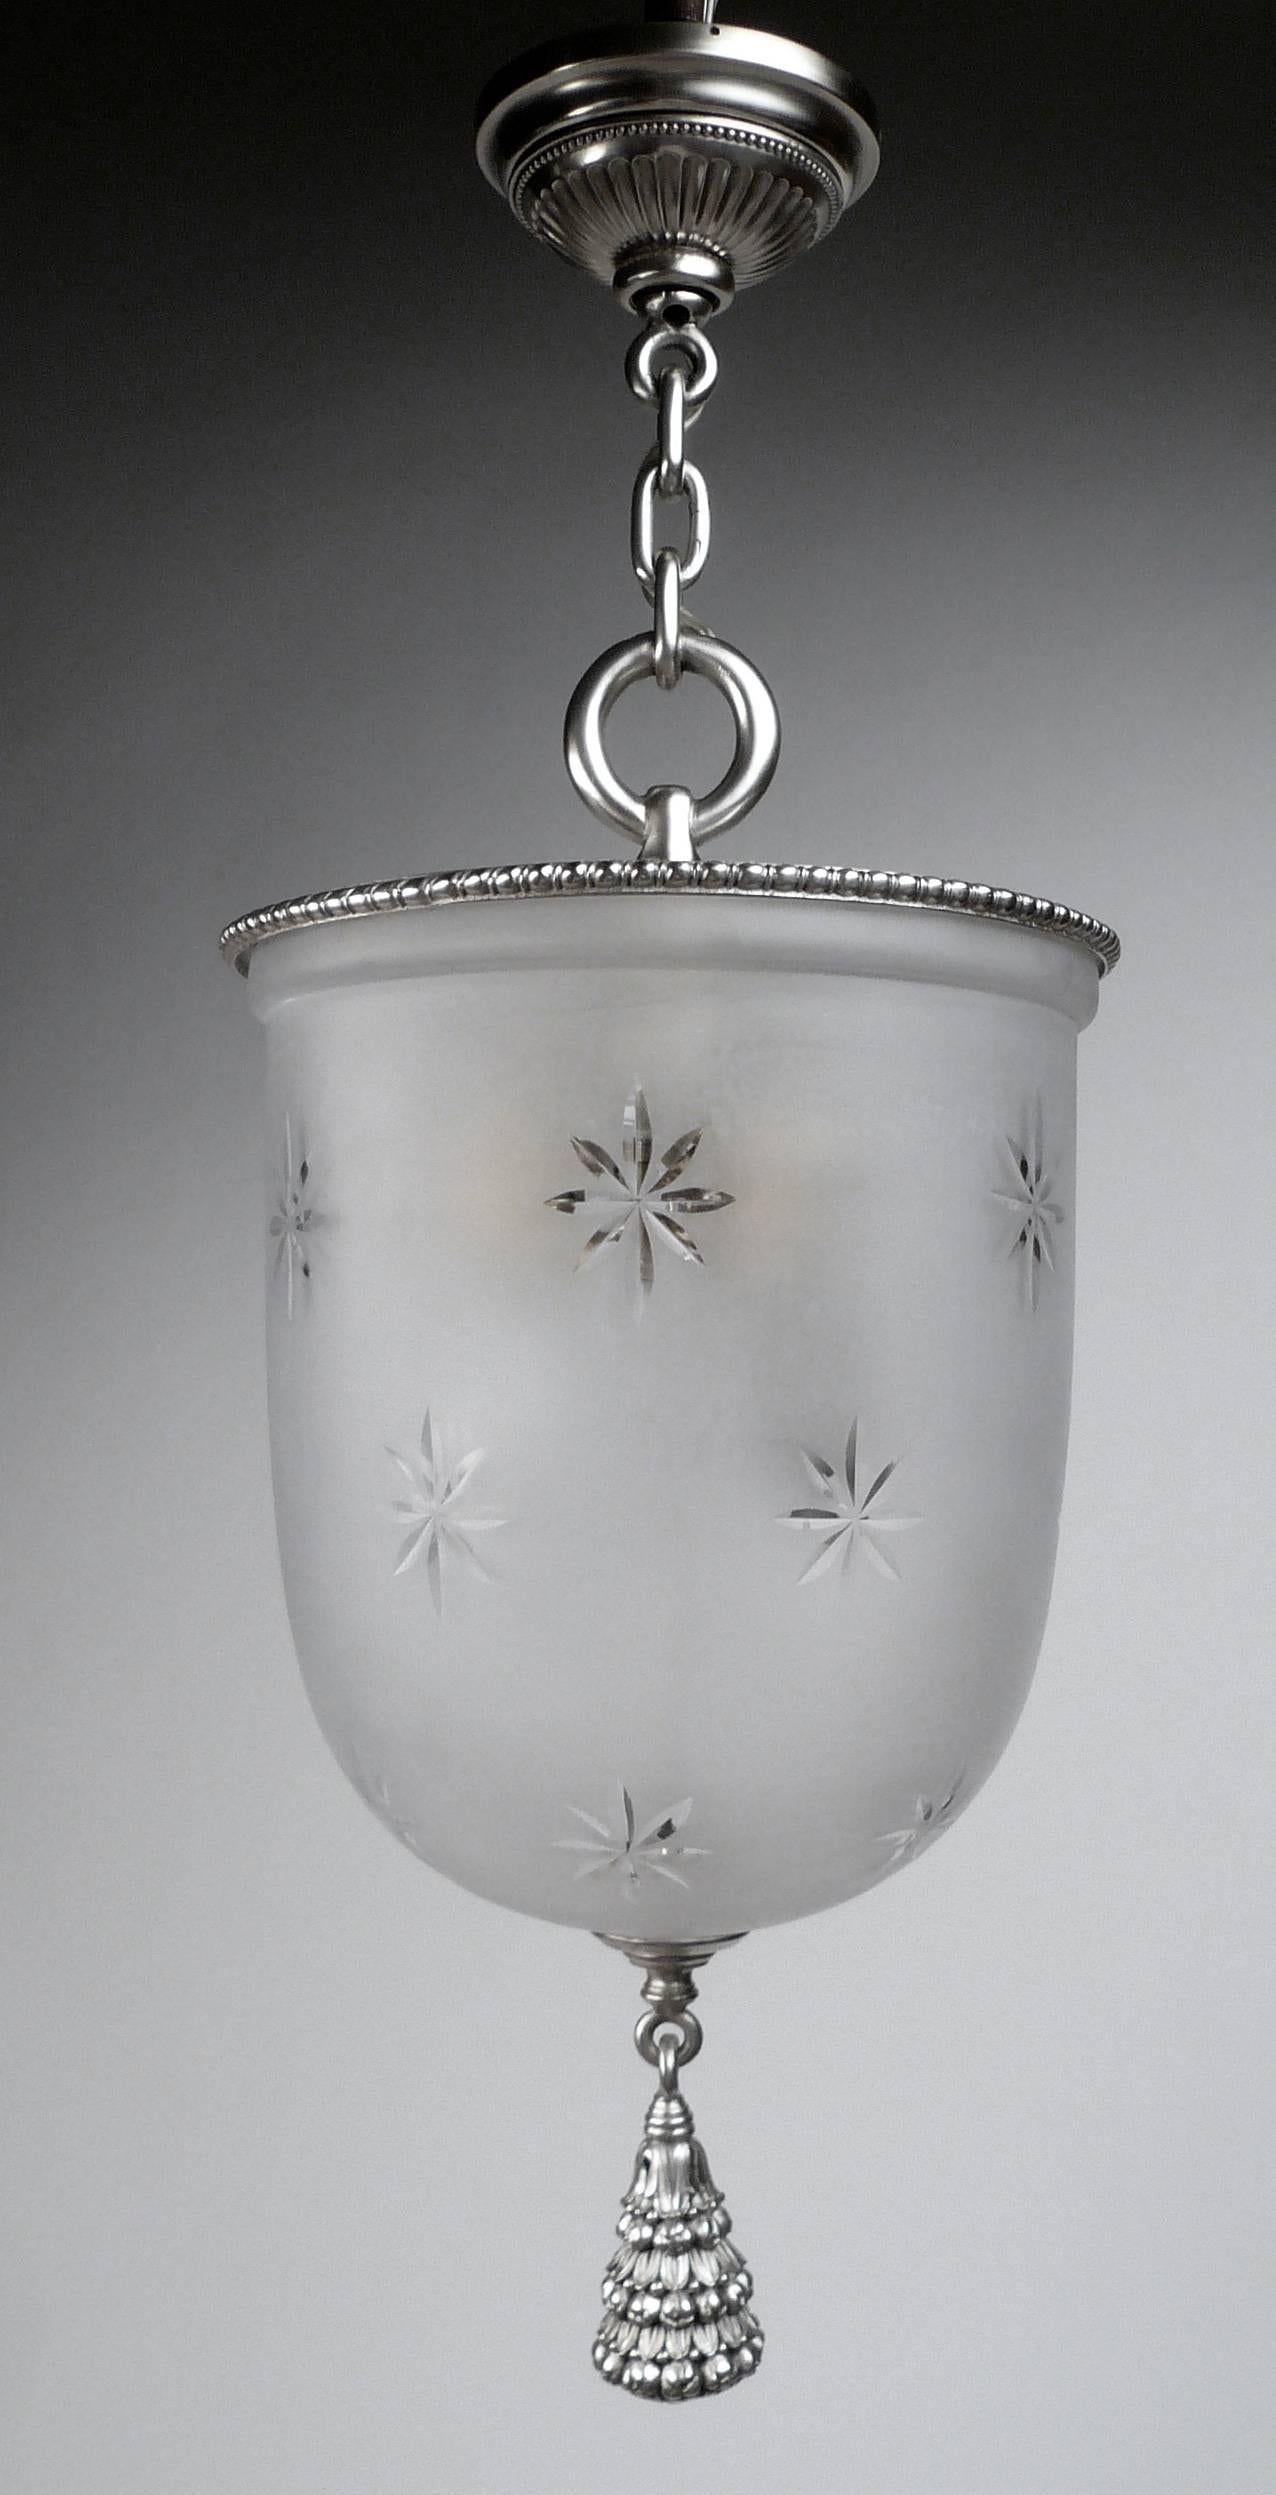 This hanging pendant fixture features a star pattern cut and frosted glass shade. The finely cast silvered bronze mounts include a hanging fruit motif tassel. It is equipped with three standard base light sockets.